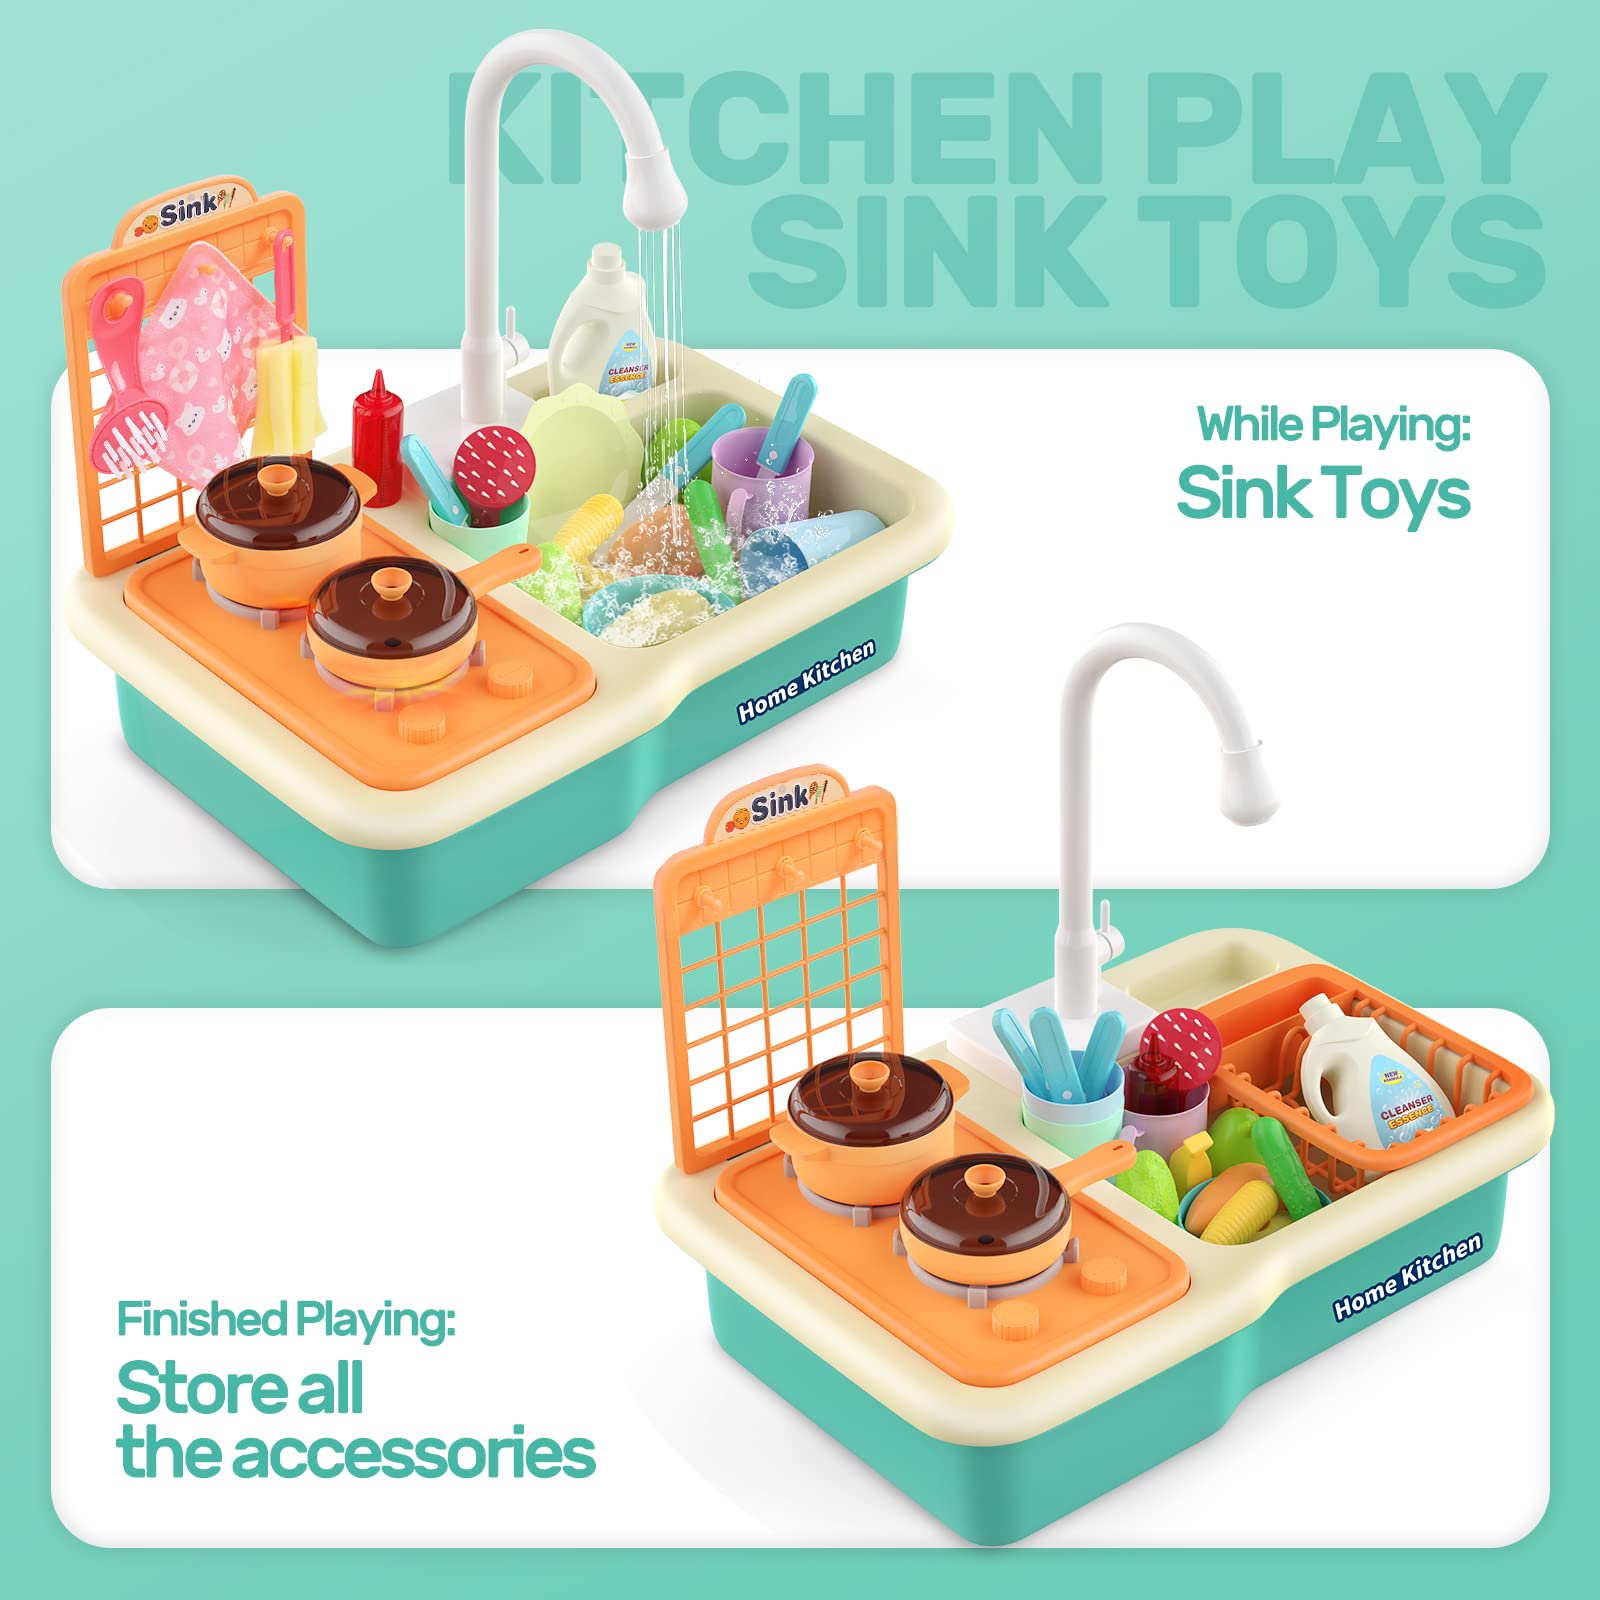 CUTE STONE Play Kitchen, Kids Kitchen Playset with Play Sink, Cooking